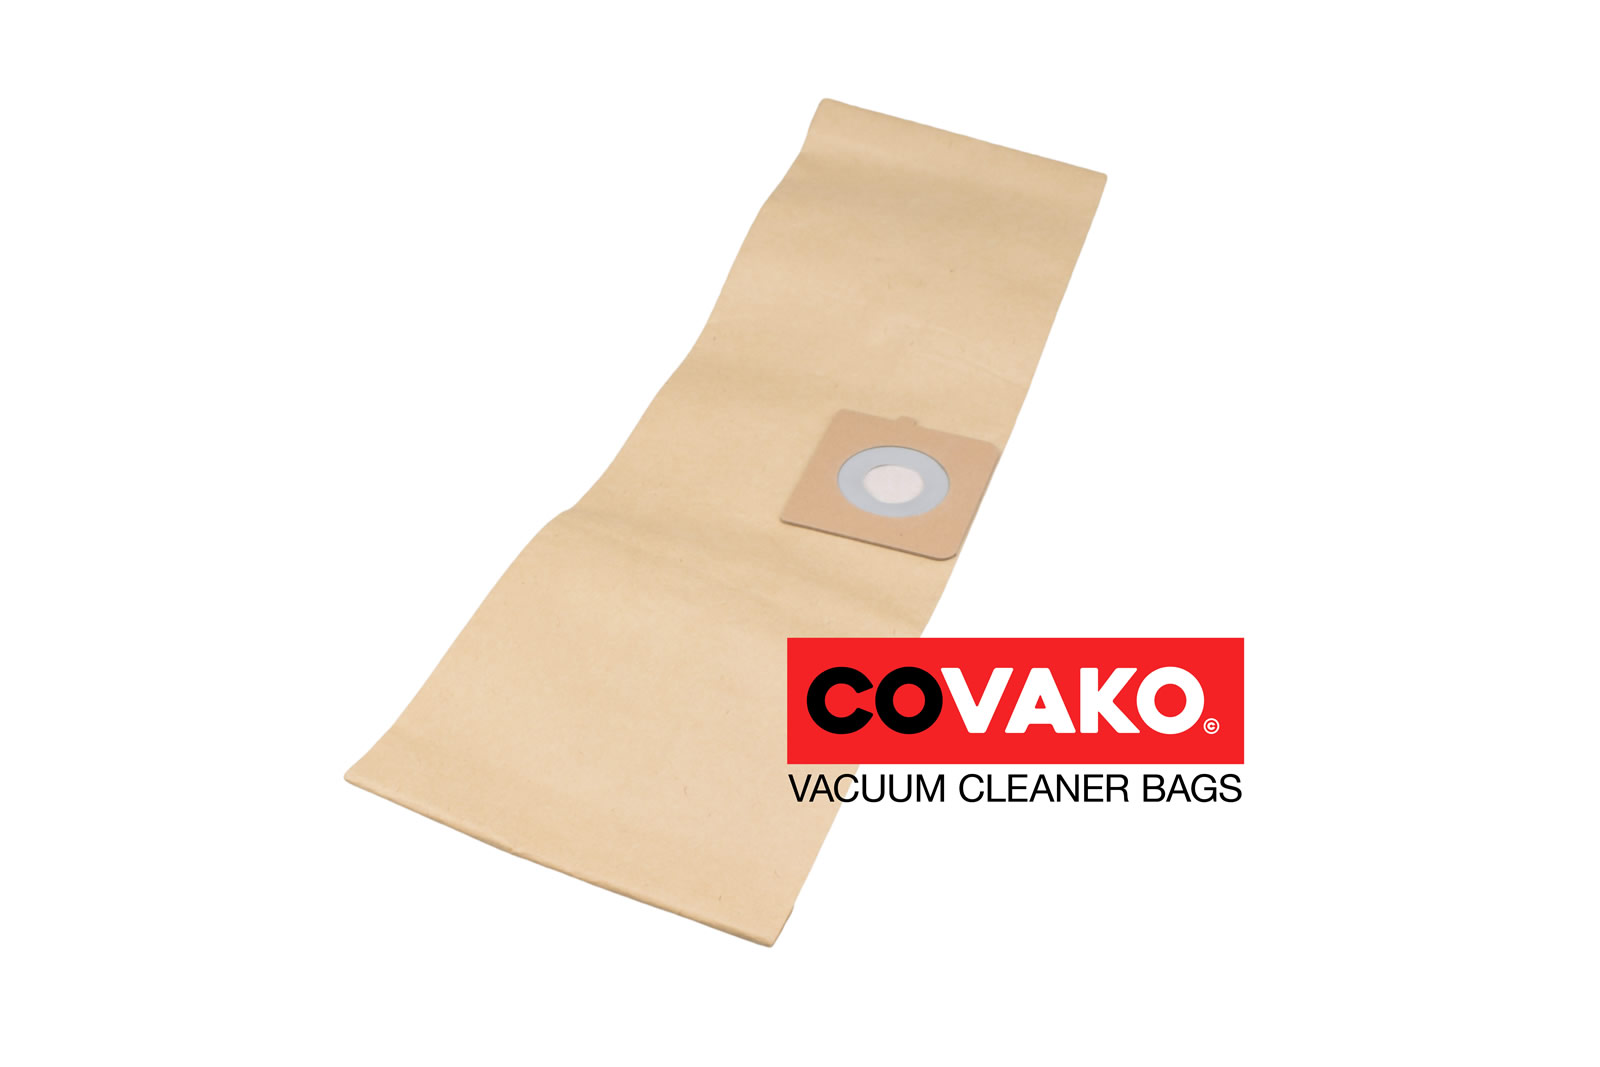 Oehme Otto Silent 15 / Paper - Oehme Otto vacuum cleaner bags